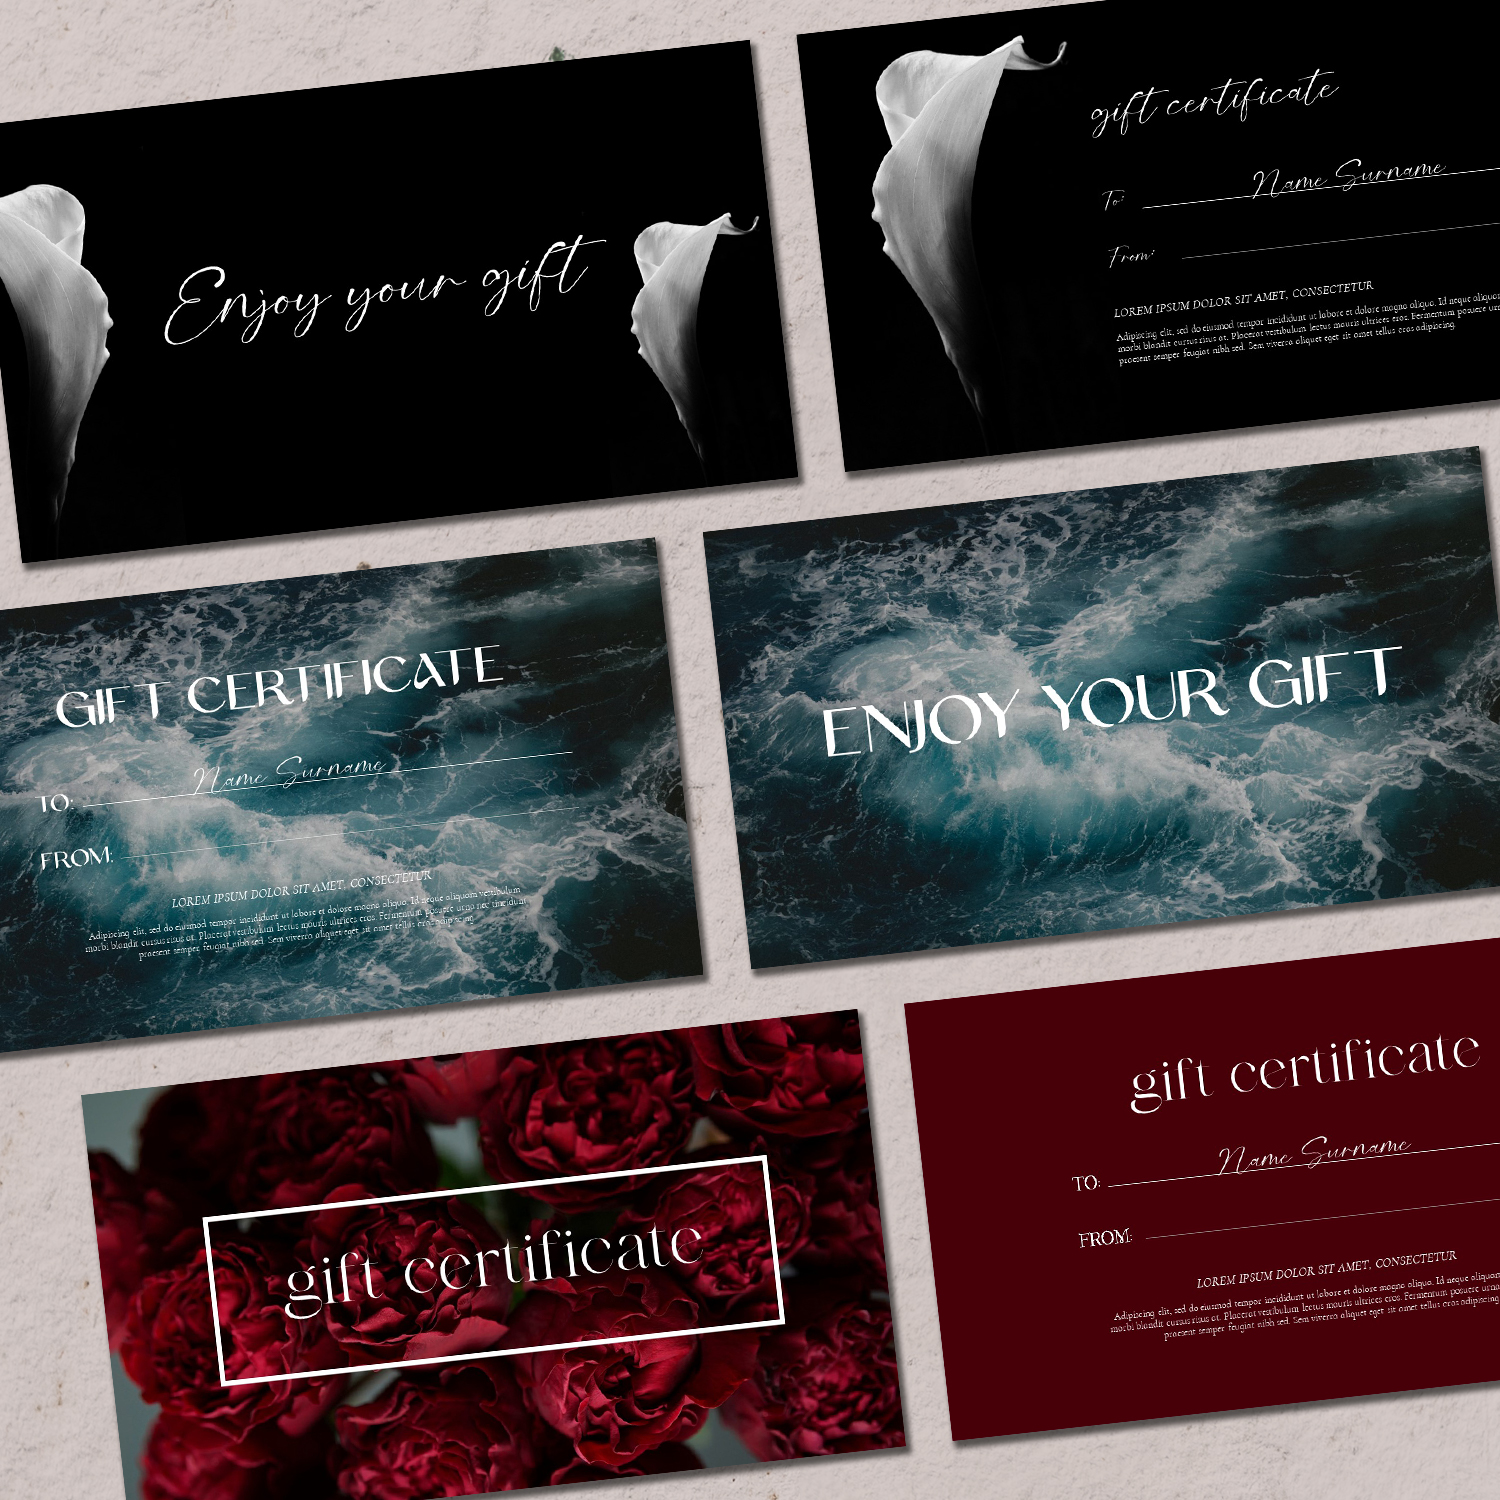 Images with gift certificate template powerpoint.